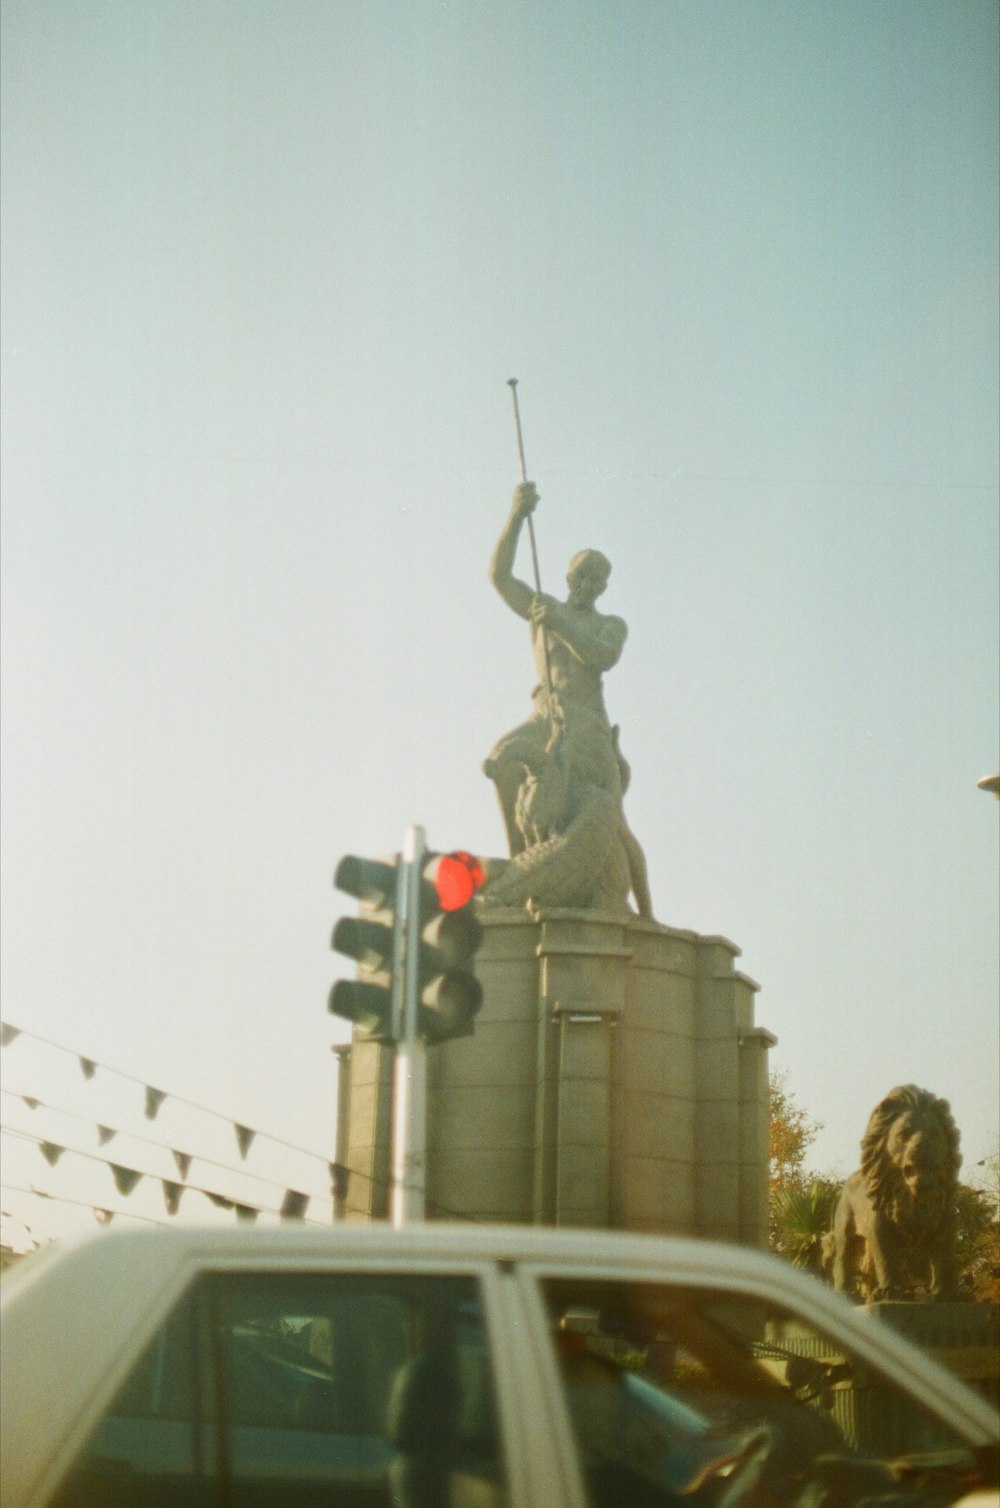 a traffic light with a statue on top of it